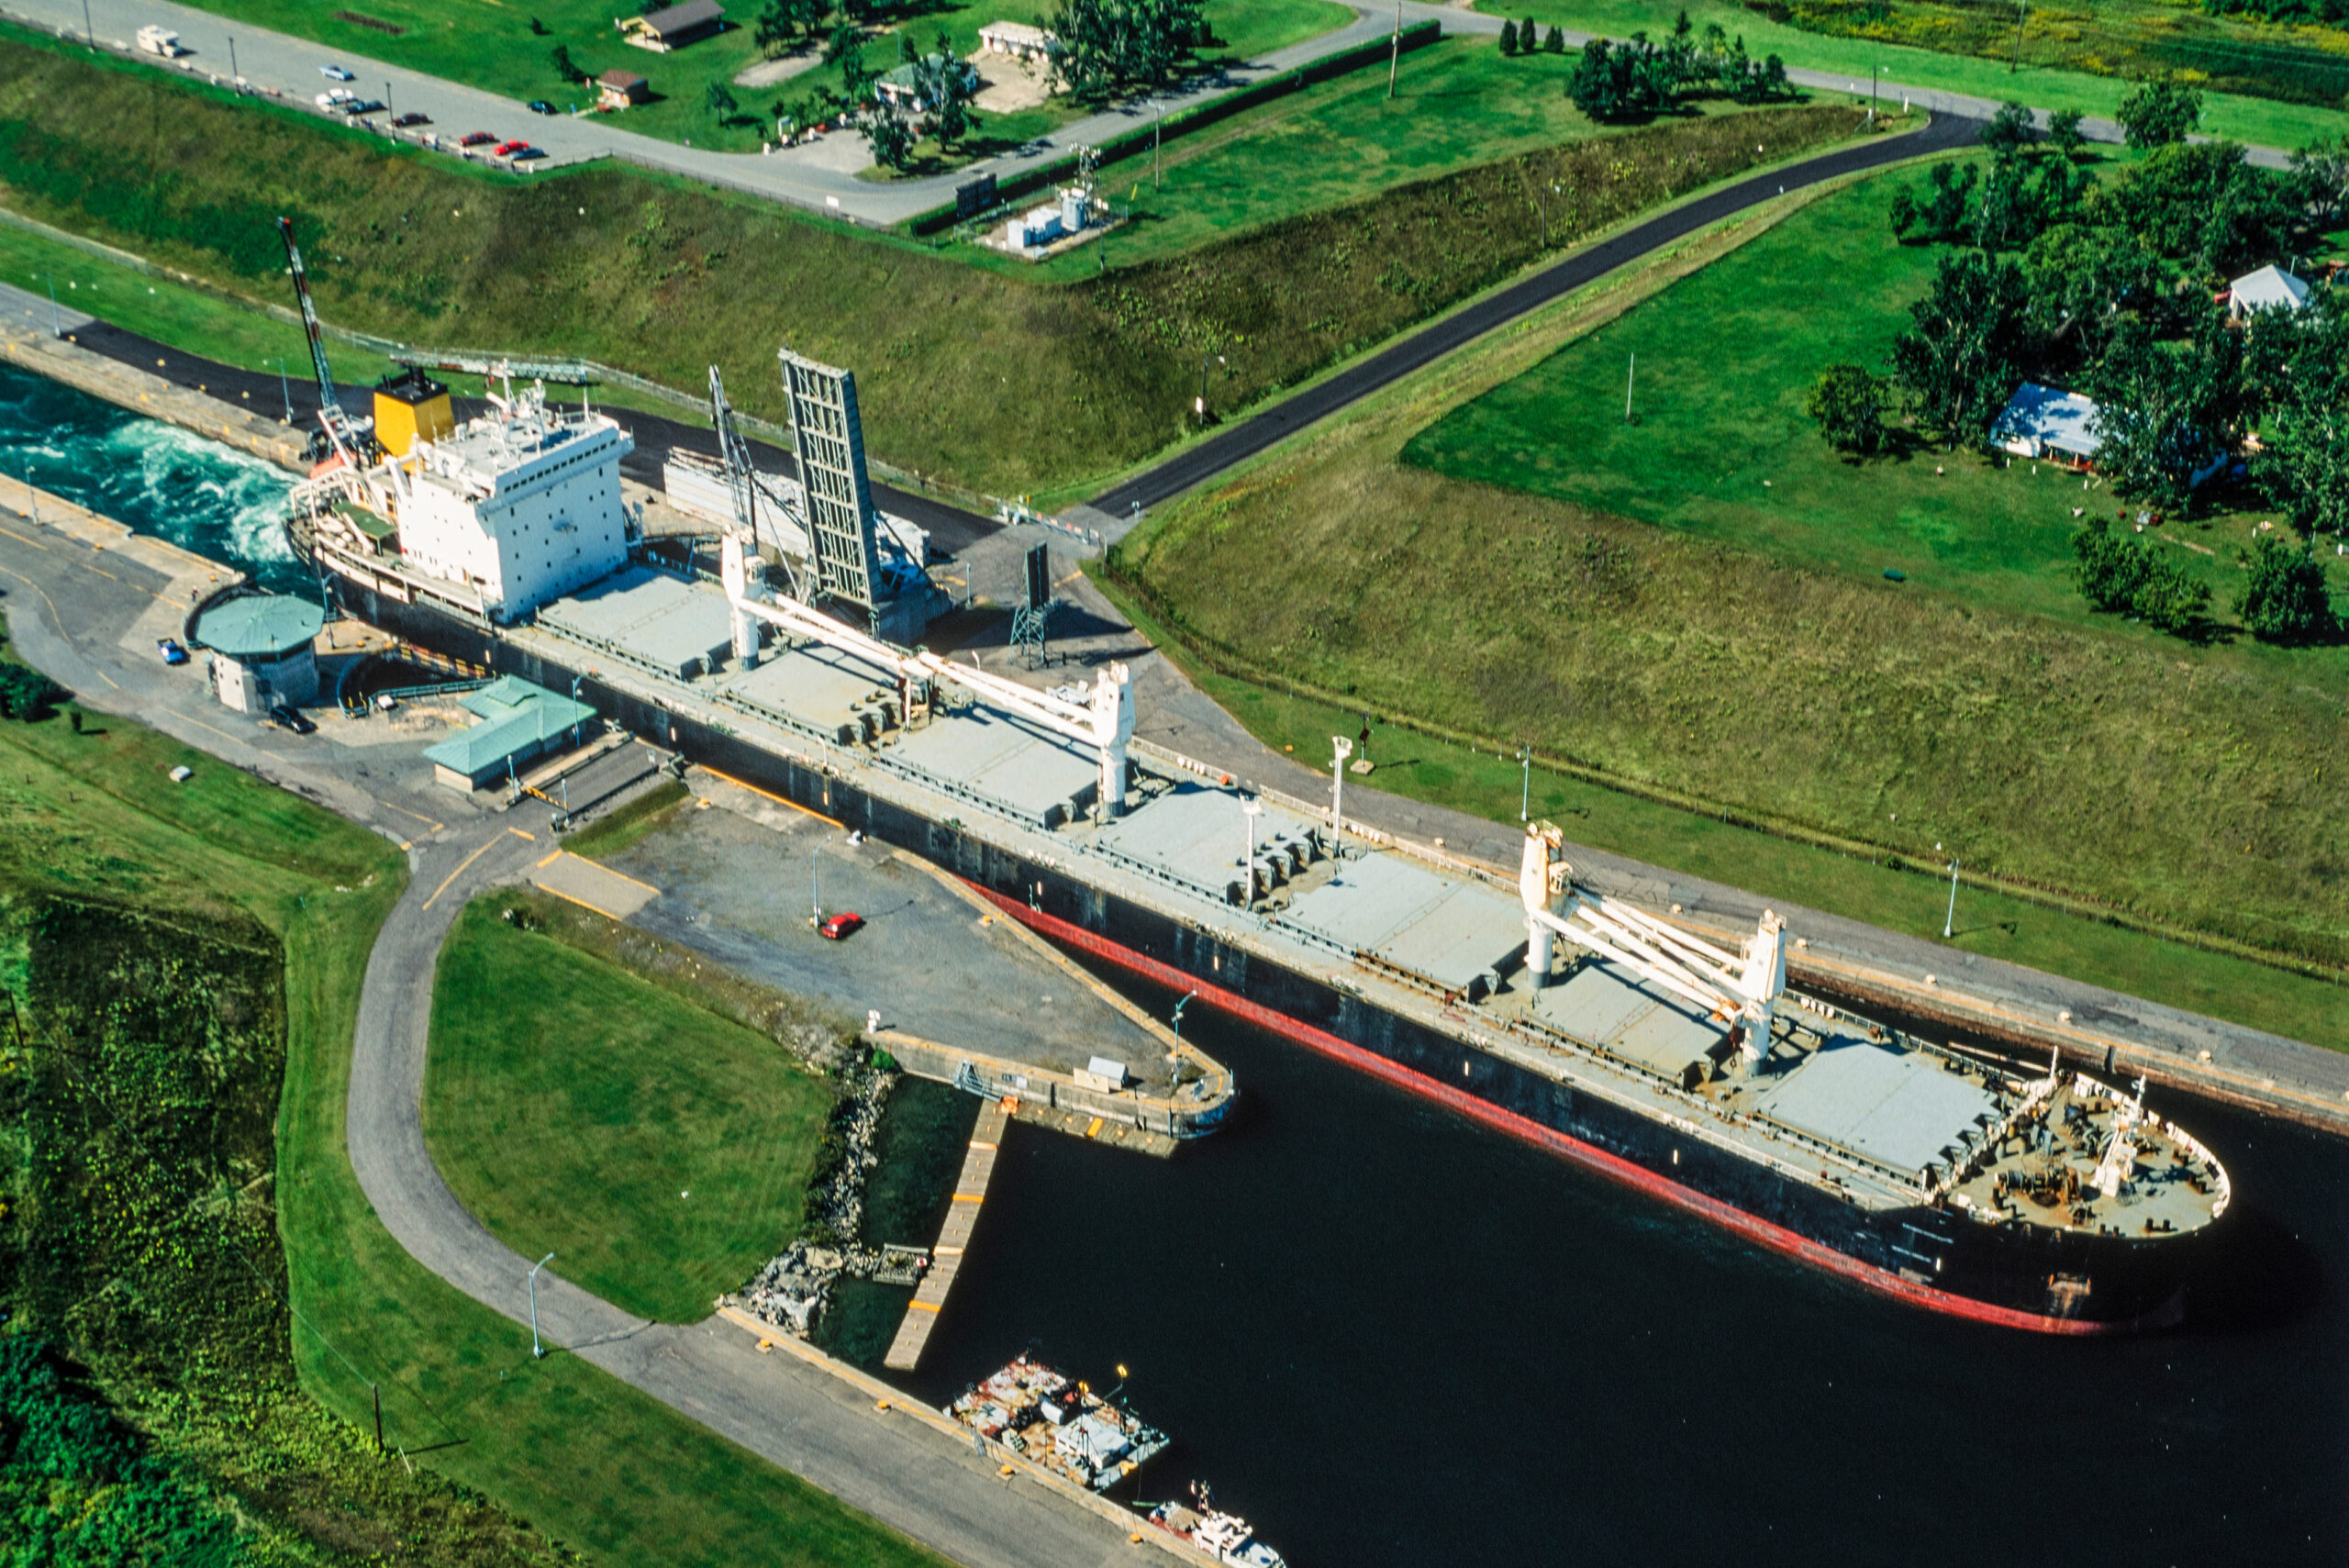 Aerial image of St. Lawrence Seaway,Ontario,Canada with a bulkcarrier passing.